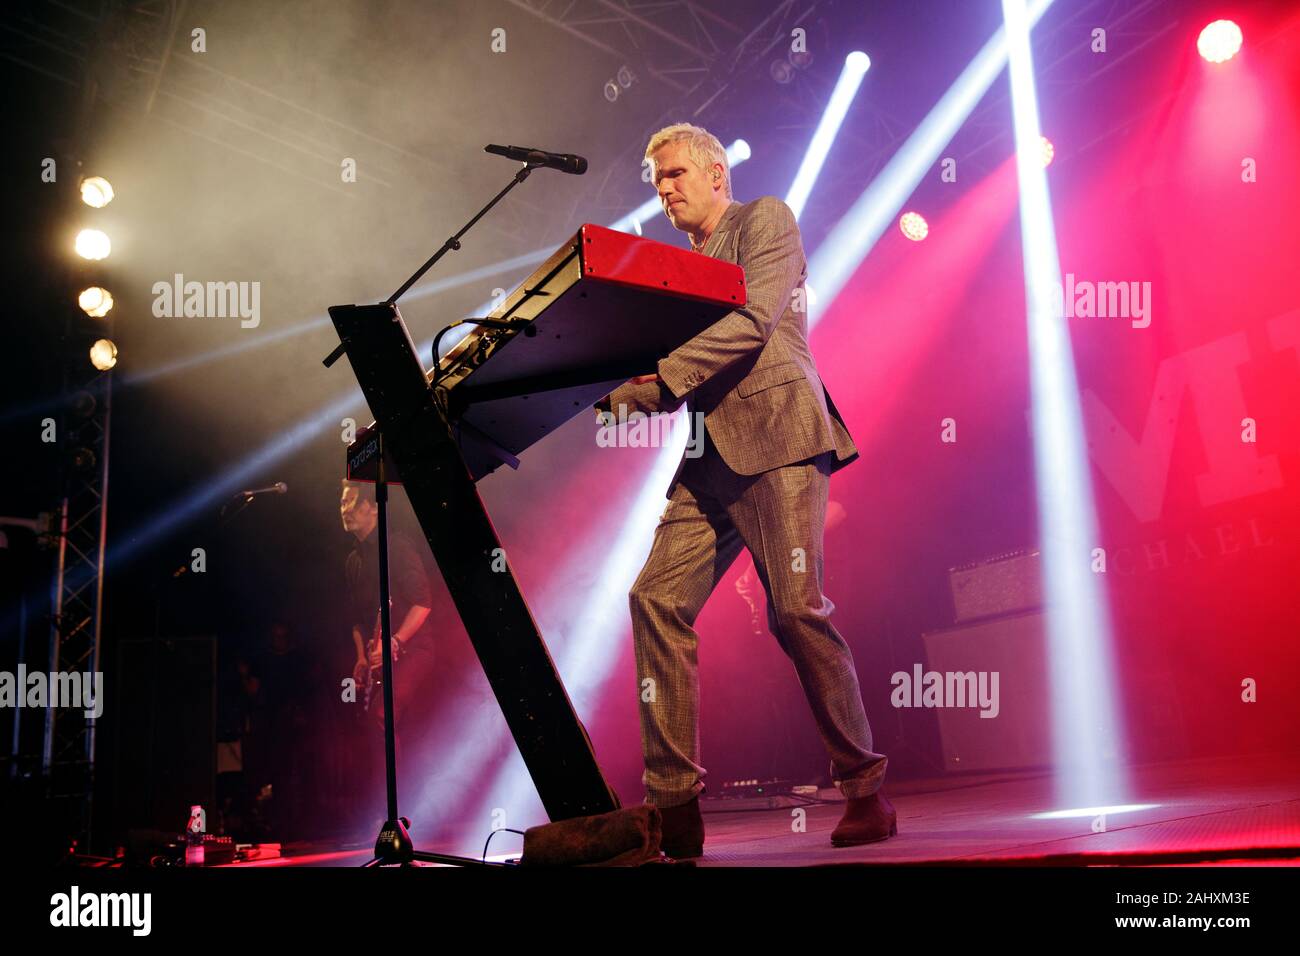 Vig, Denmark. 11th, July 2019. The Danish band Michael Learns to Rock performs a live concert during the Danish music festival Vig Festival 2019. Here singer and musician Jascha Richter is seen live on stage. (Photo credit: Gonzales Photo - Martin Faelt). Stock Photo